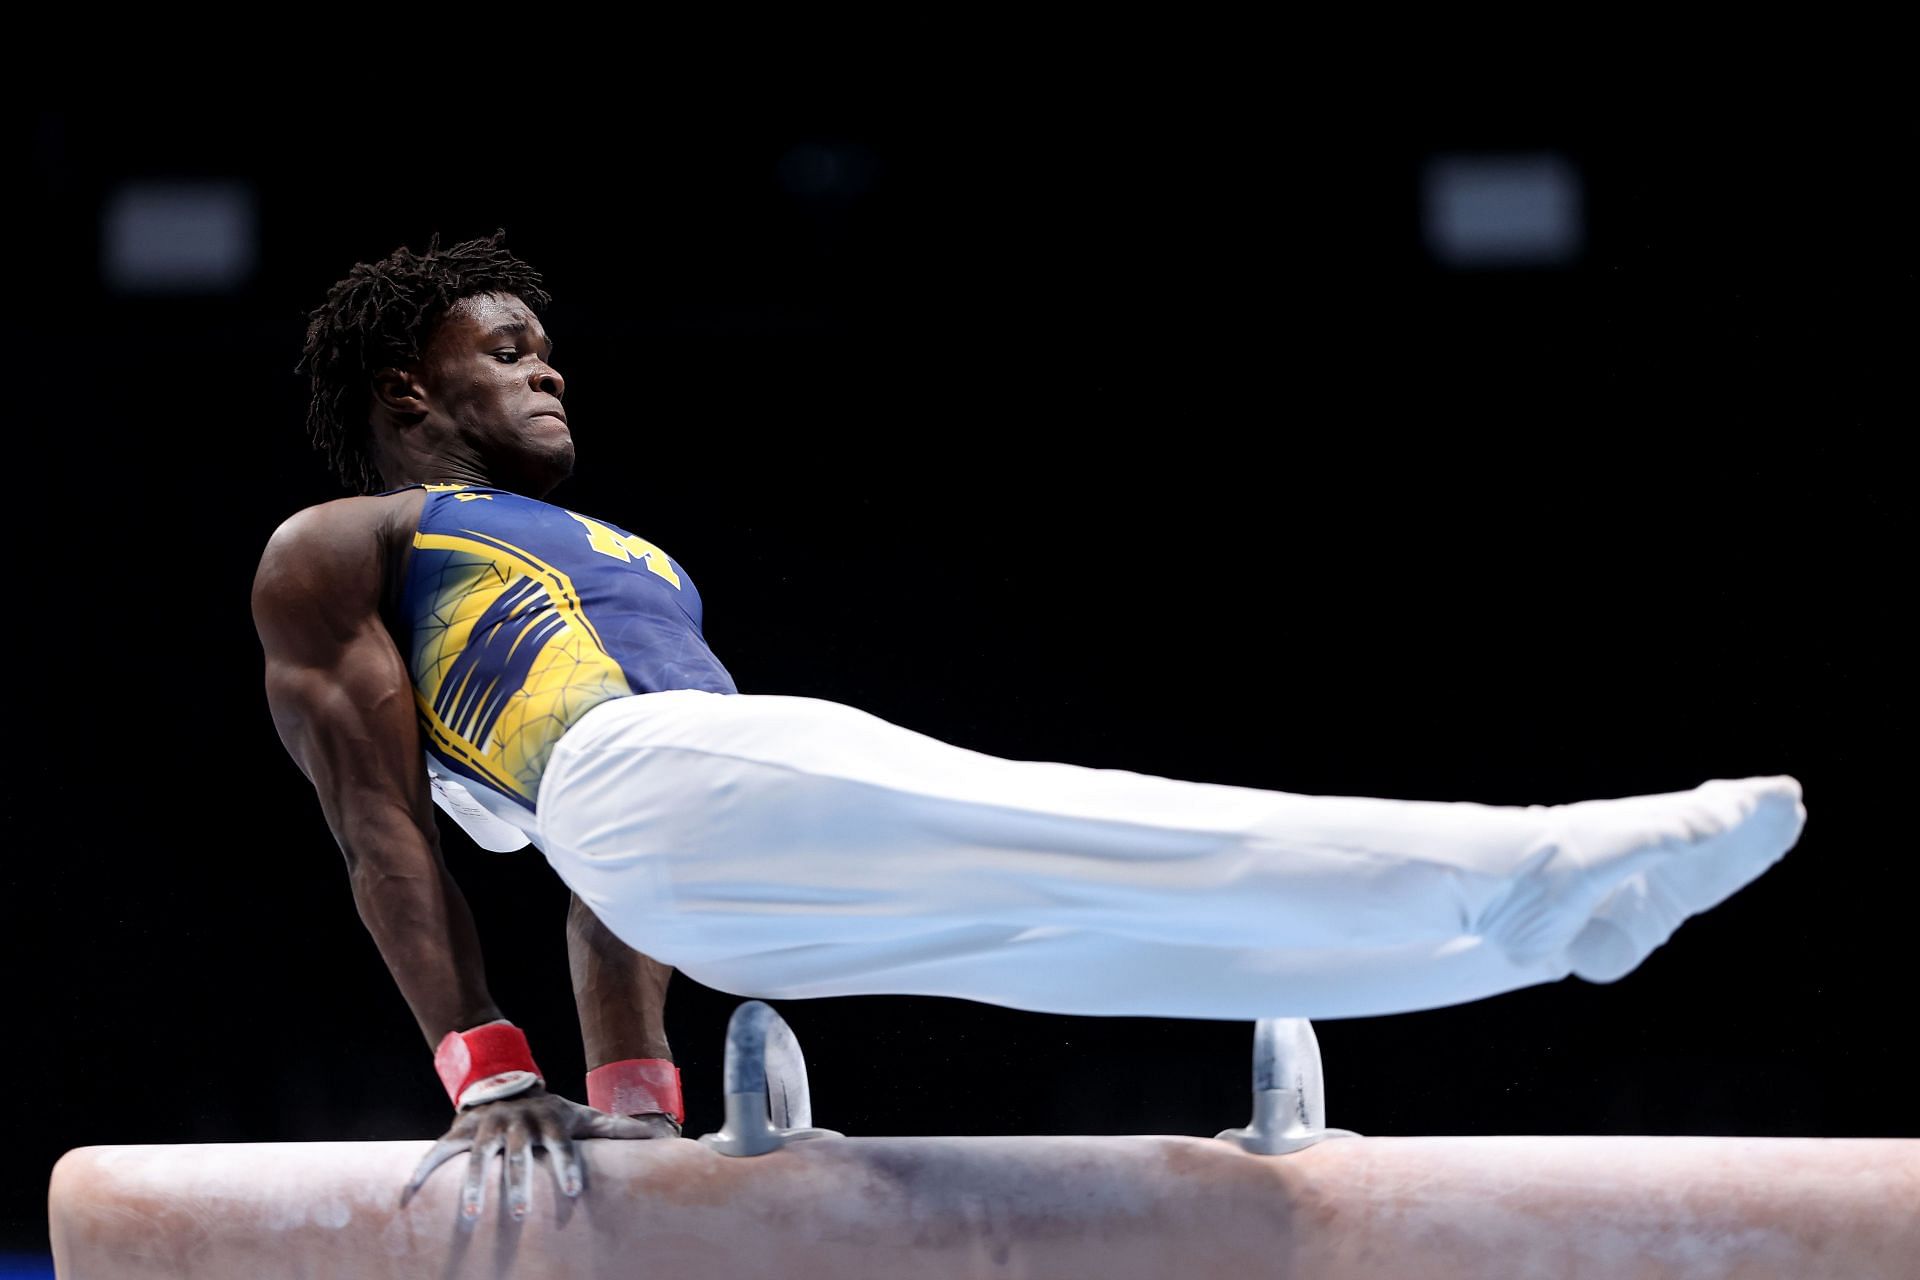 Fred Richard in action at the 2023 U.S. Gymnastics Championships in San Jose, California.